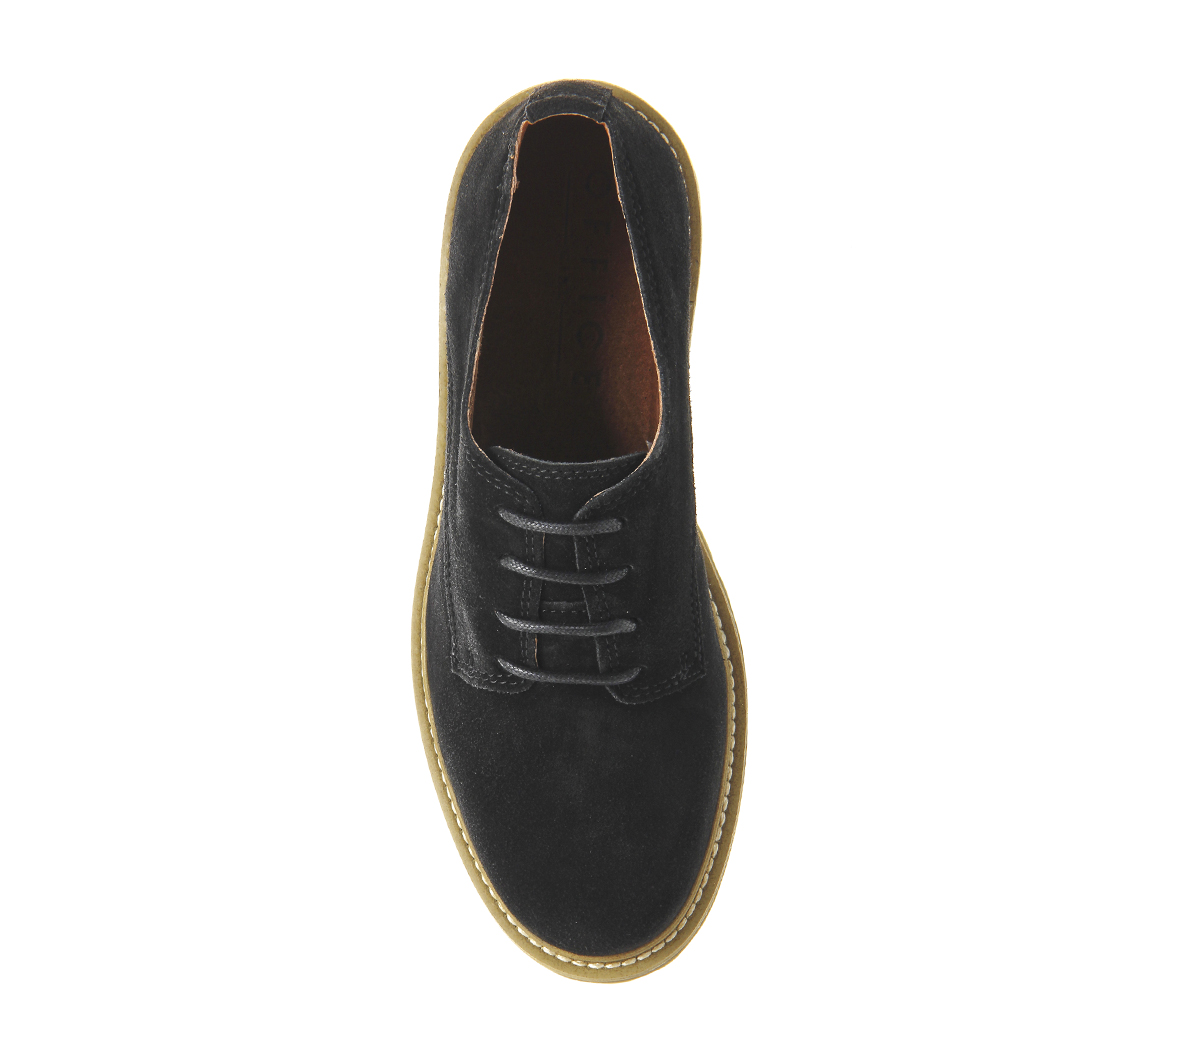 Office Latched Cleated Sole Brogues Black Suede - Flats